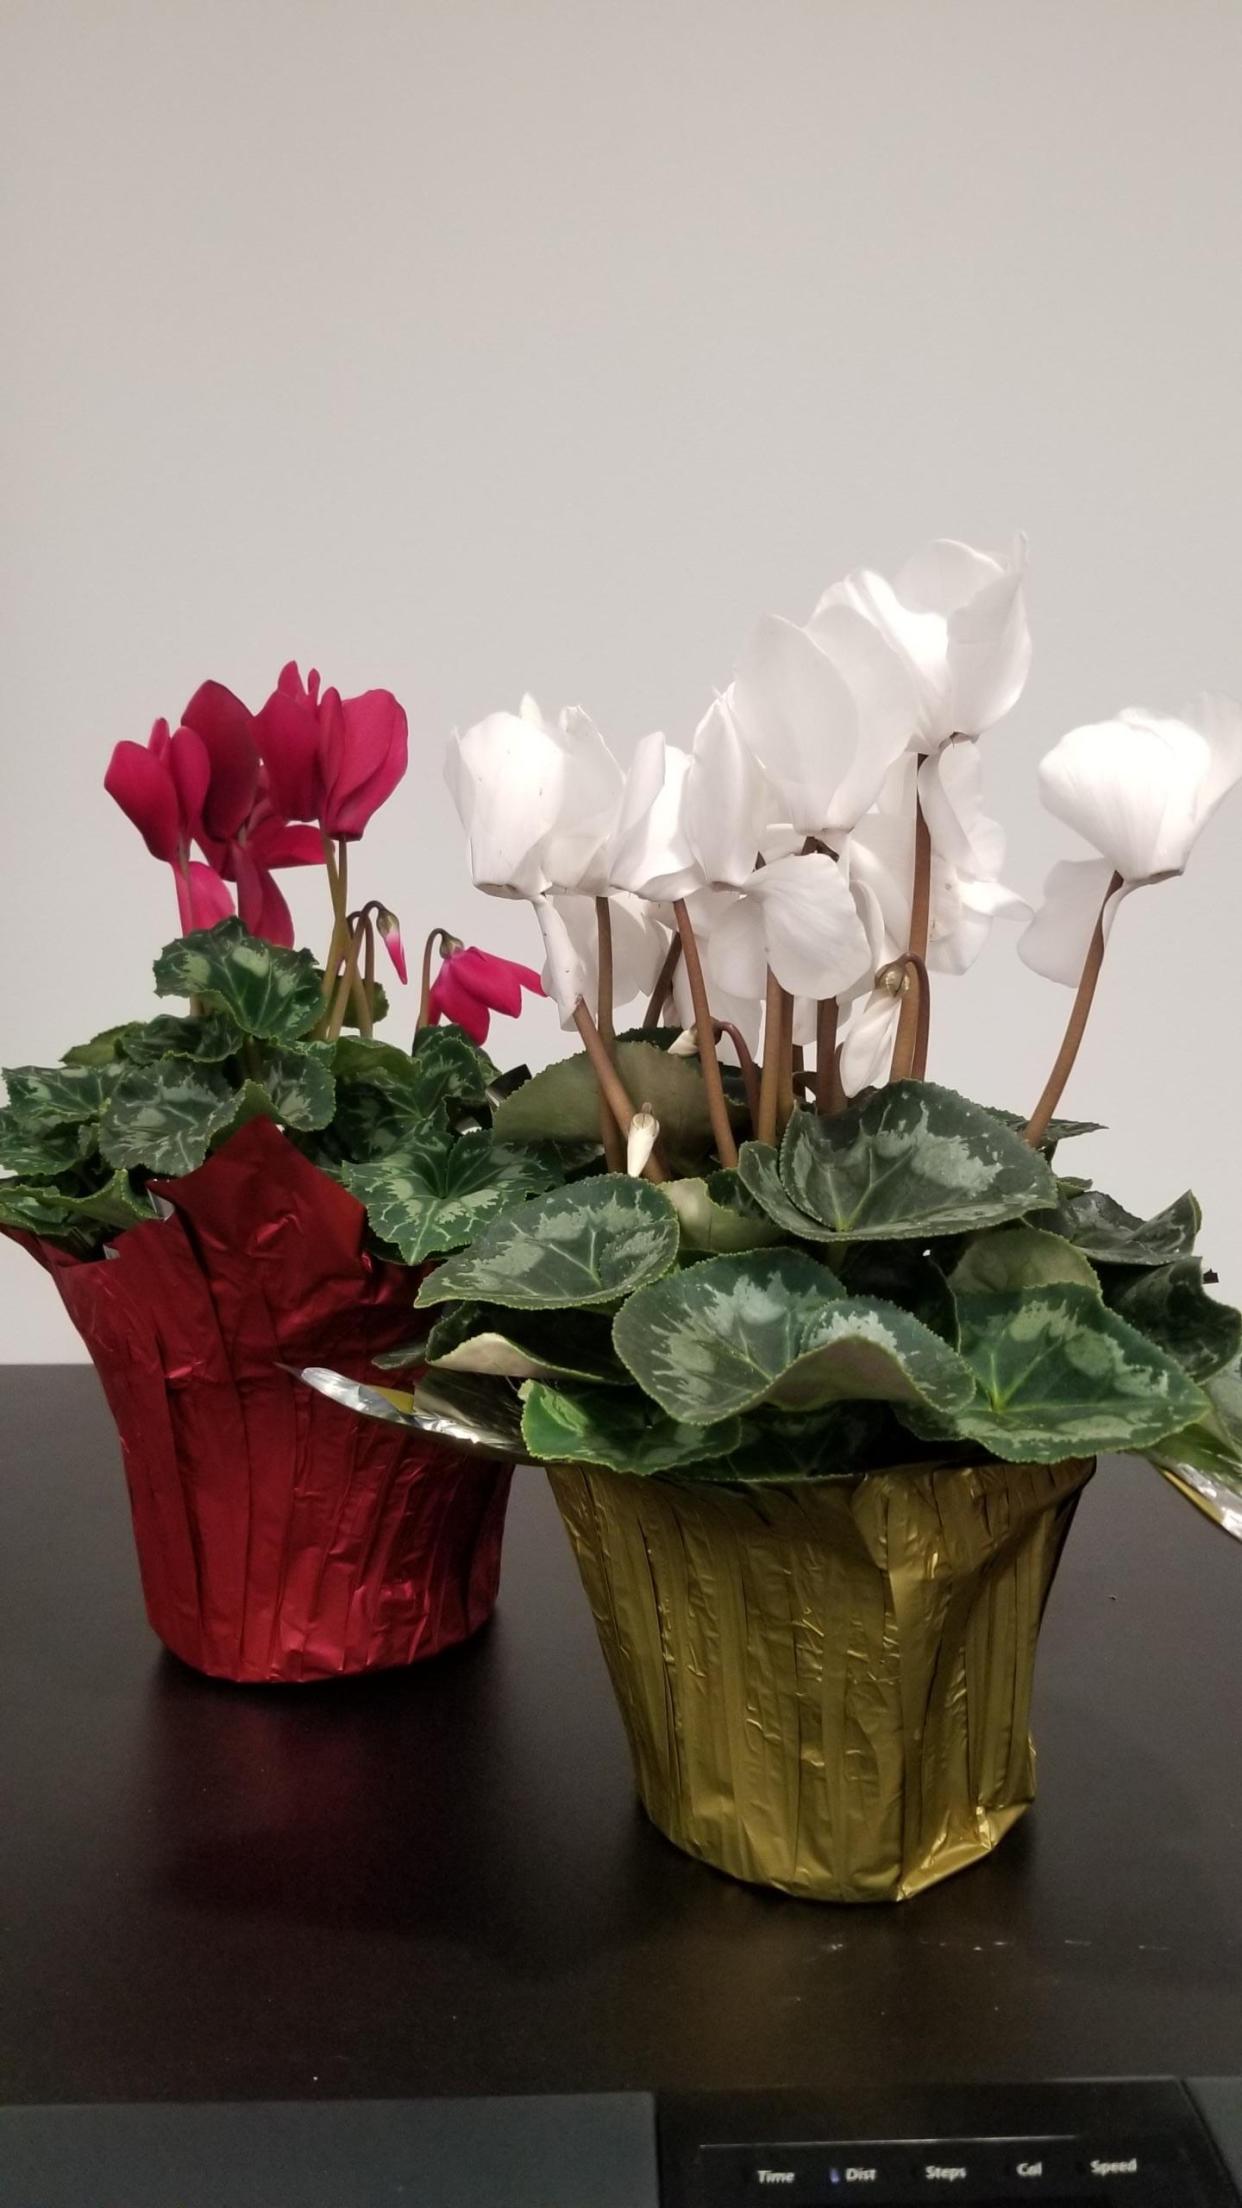 Cyclamen and other plants make wonderful holiday gifts.